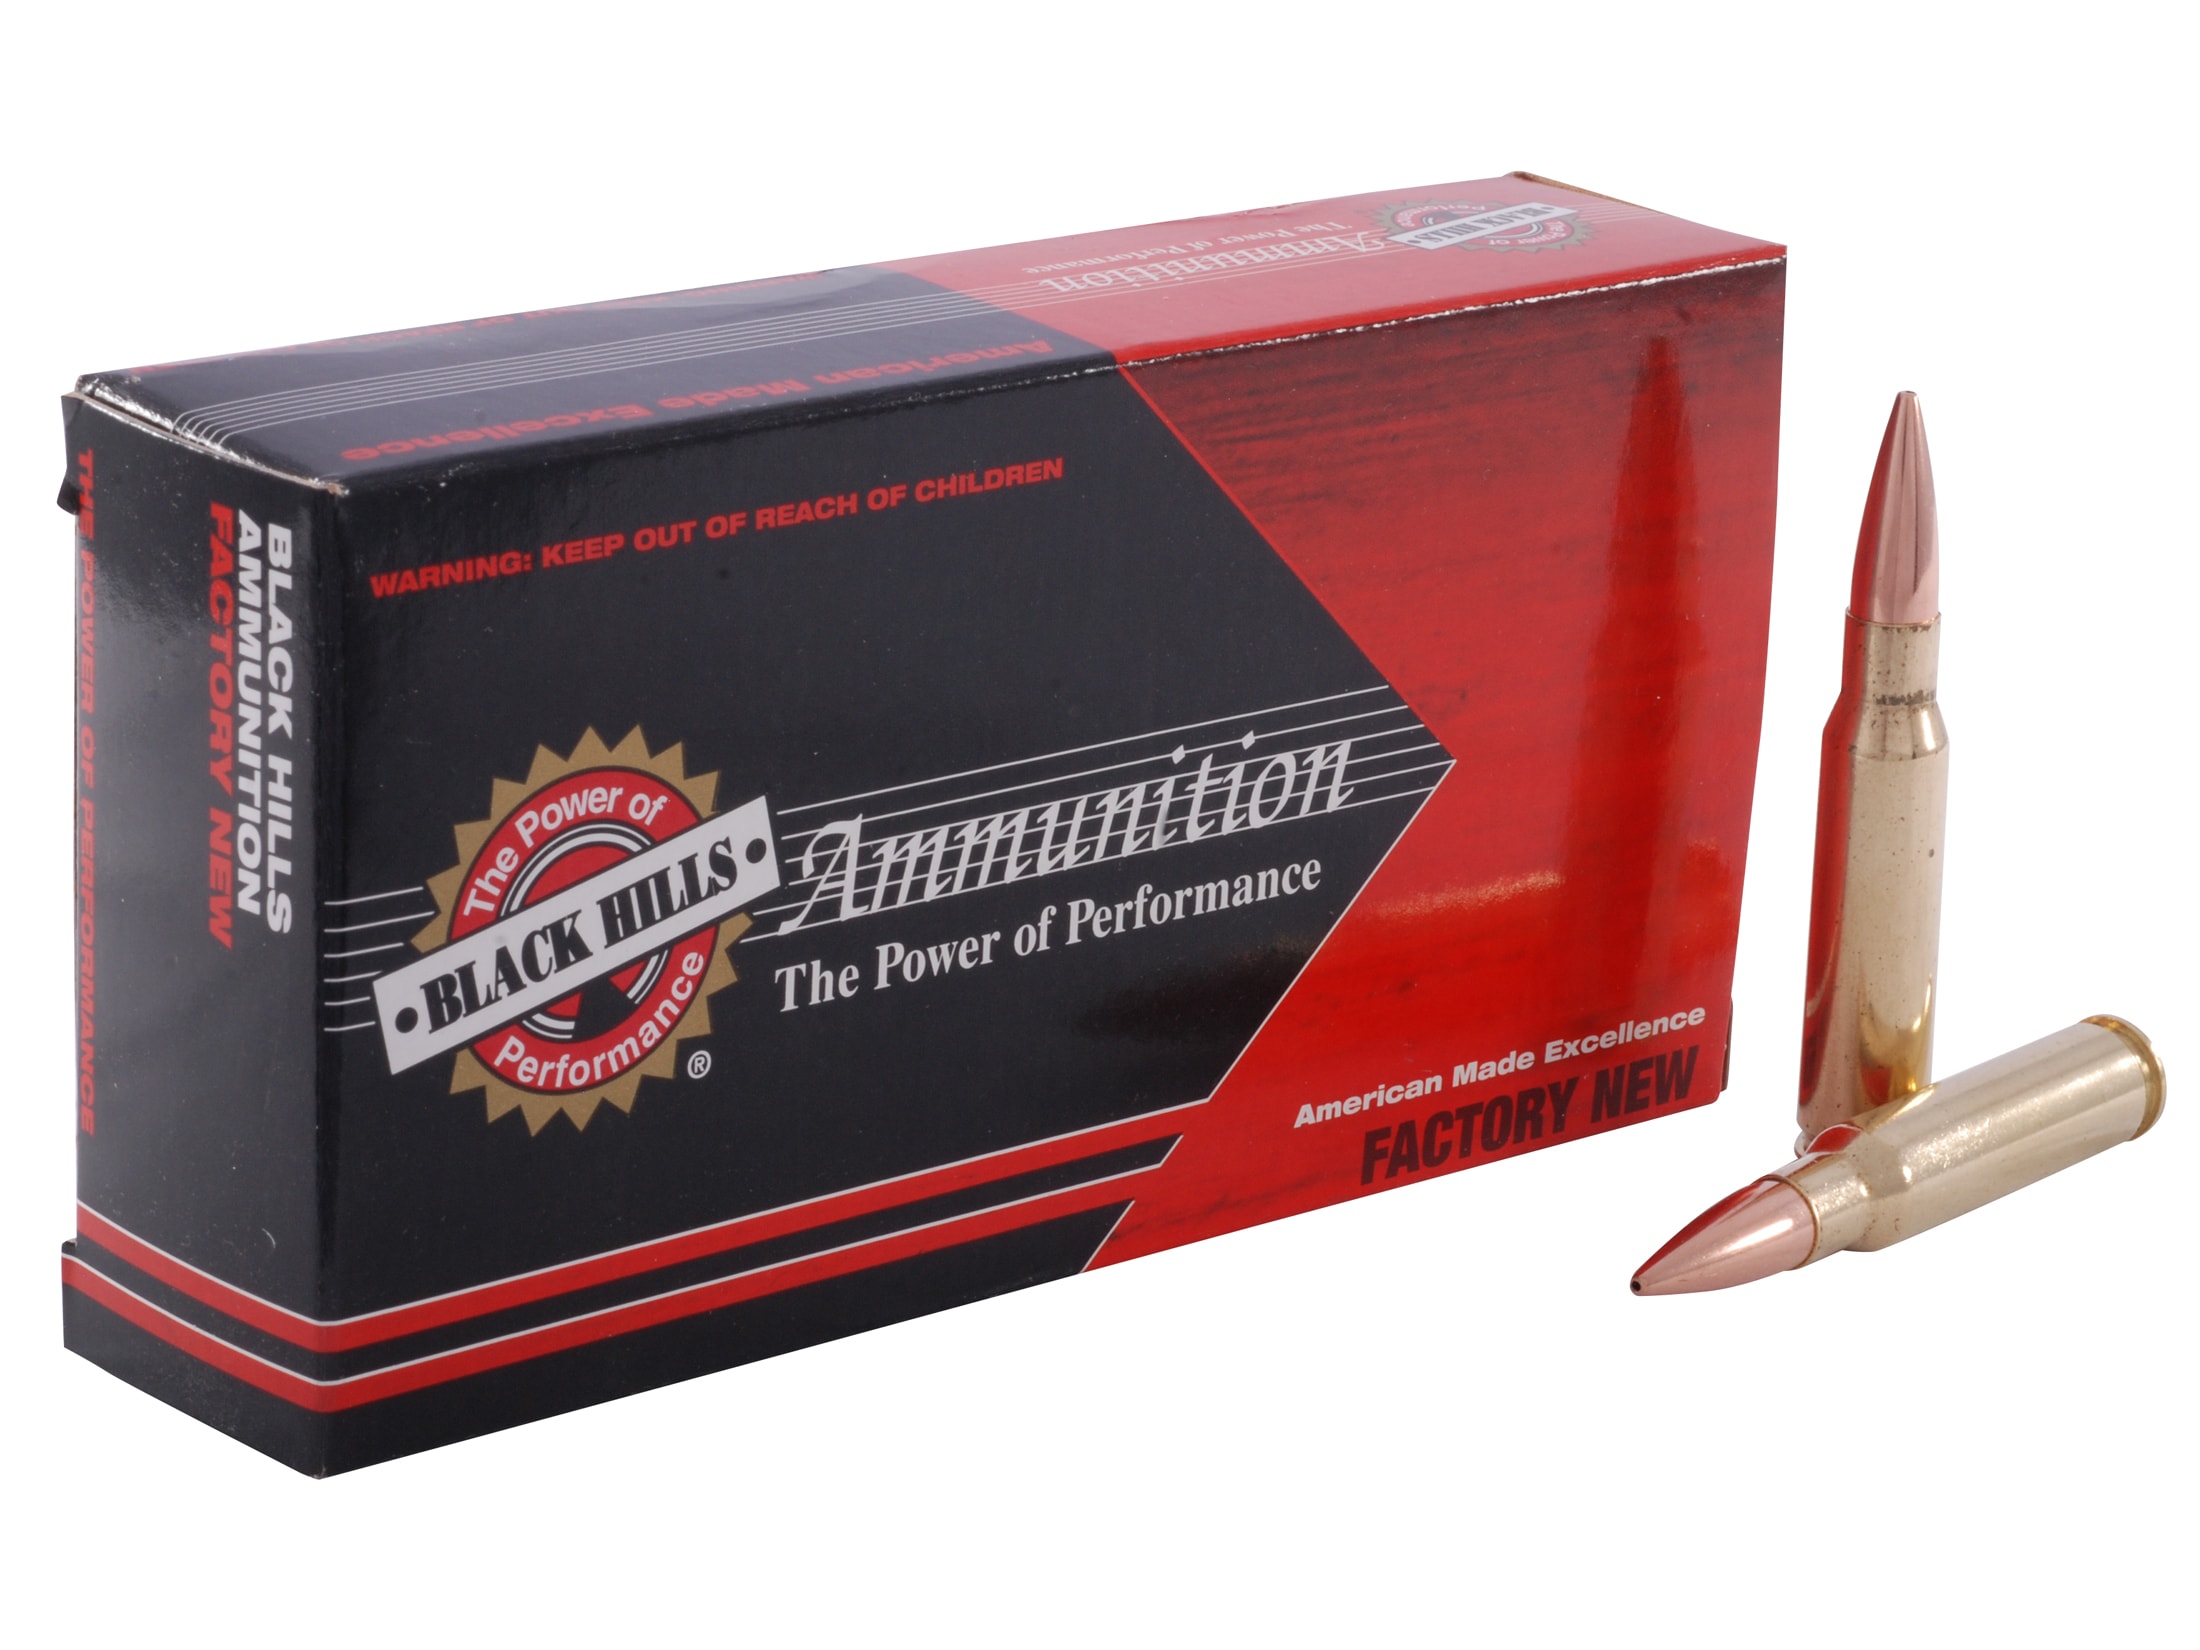 Black Hills Ammunition 308 Winchester 168 Grain Match Hollow Point Boat Tail Box of 20